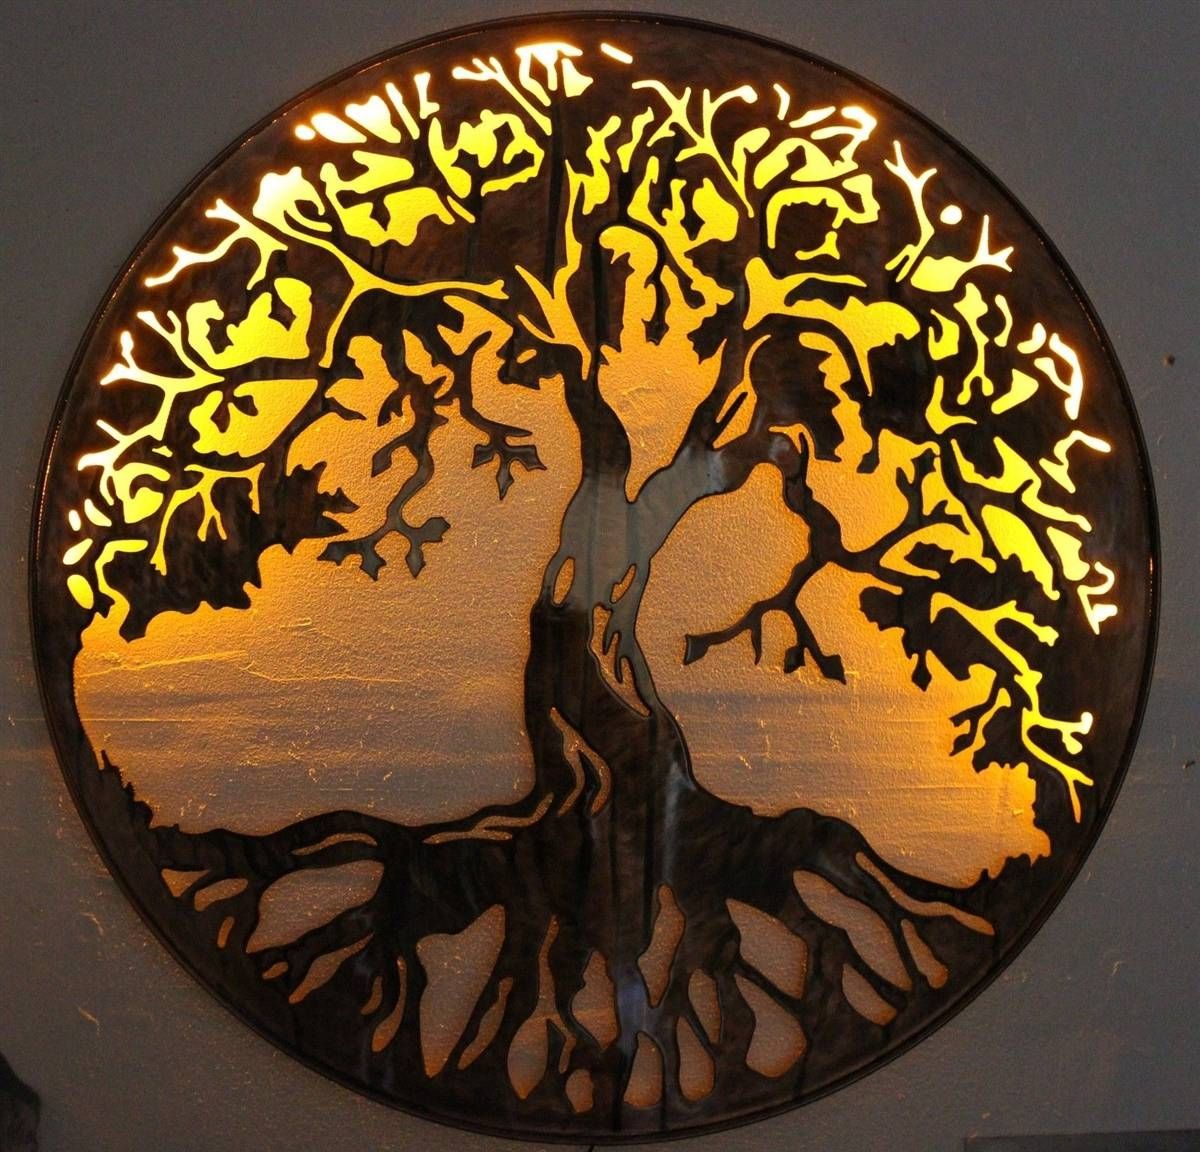 Tree Of Life Metal Wall Art 24" With Led Lightshgmw Pertaining To Most Up To Date Oak Tree Metal Wall Art (View 7 of 30)